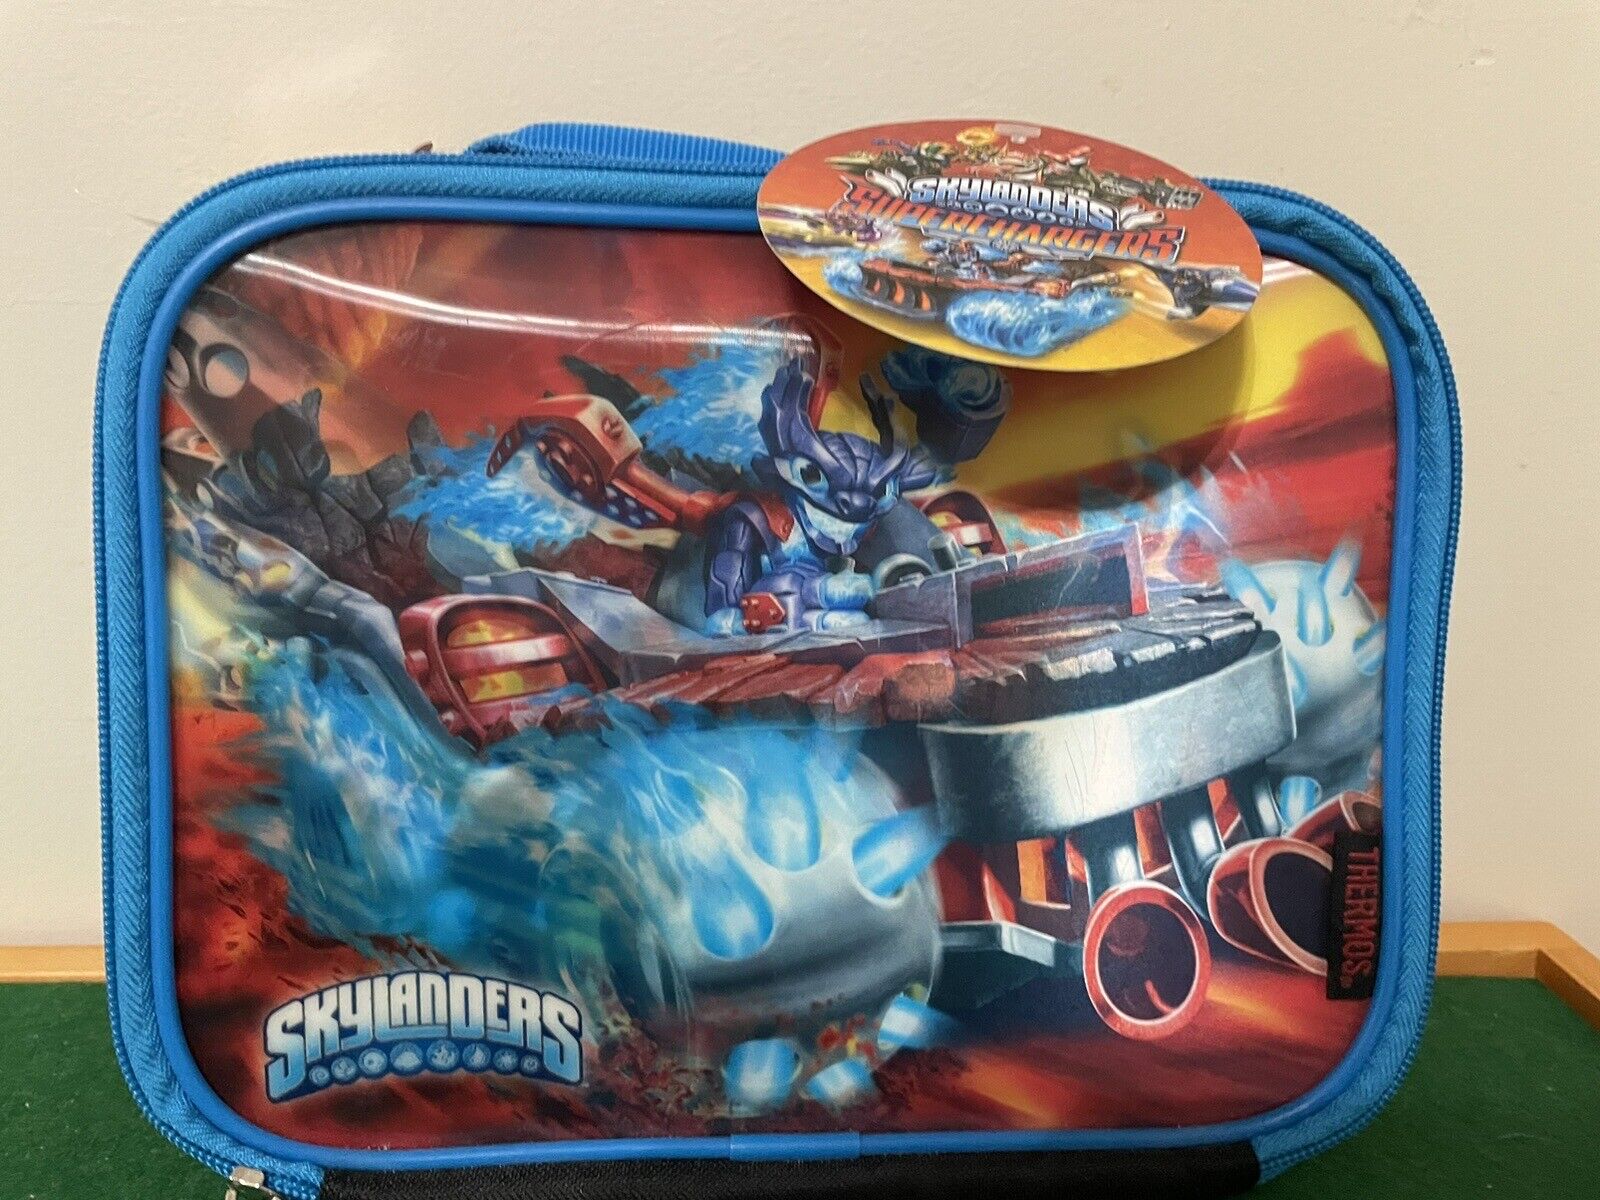 SKYLANDERS SUPERCHARGERS THERMOS BRAND INSULATED LUNCH KIT